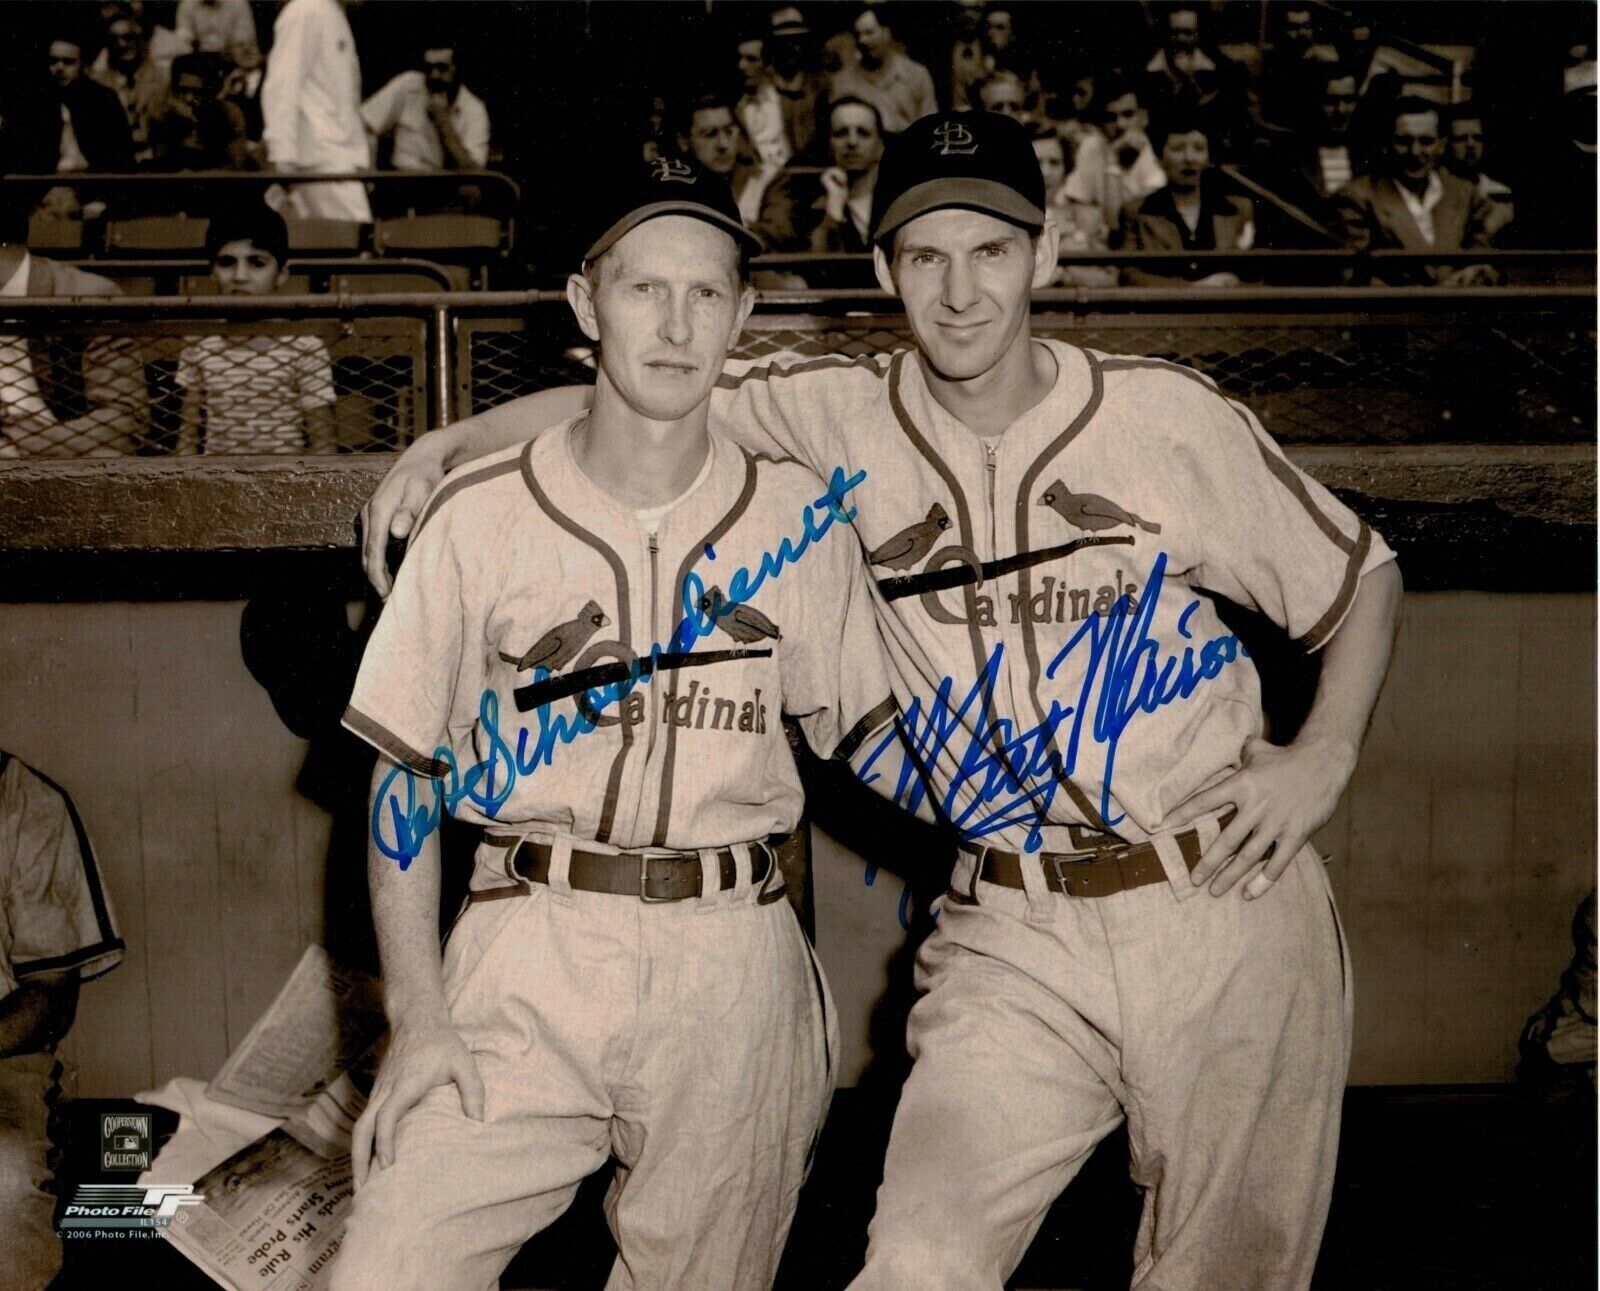 Red Schoendienst / Marion Autographed Signed 8x10 Photo Poster painting (HOF Cardinals ) REPRINT